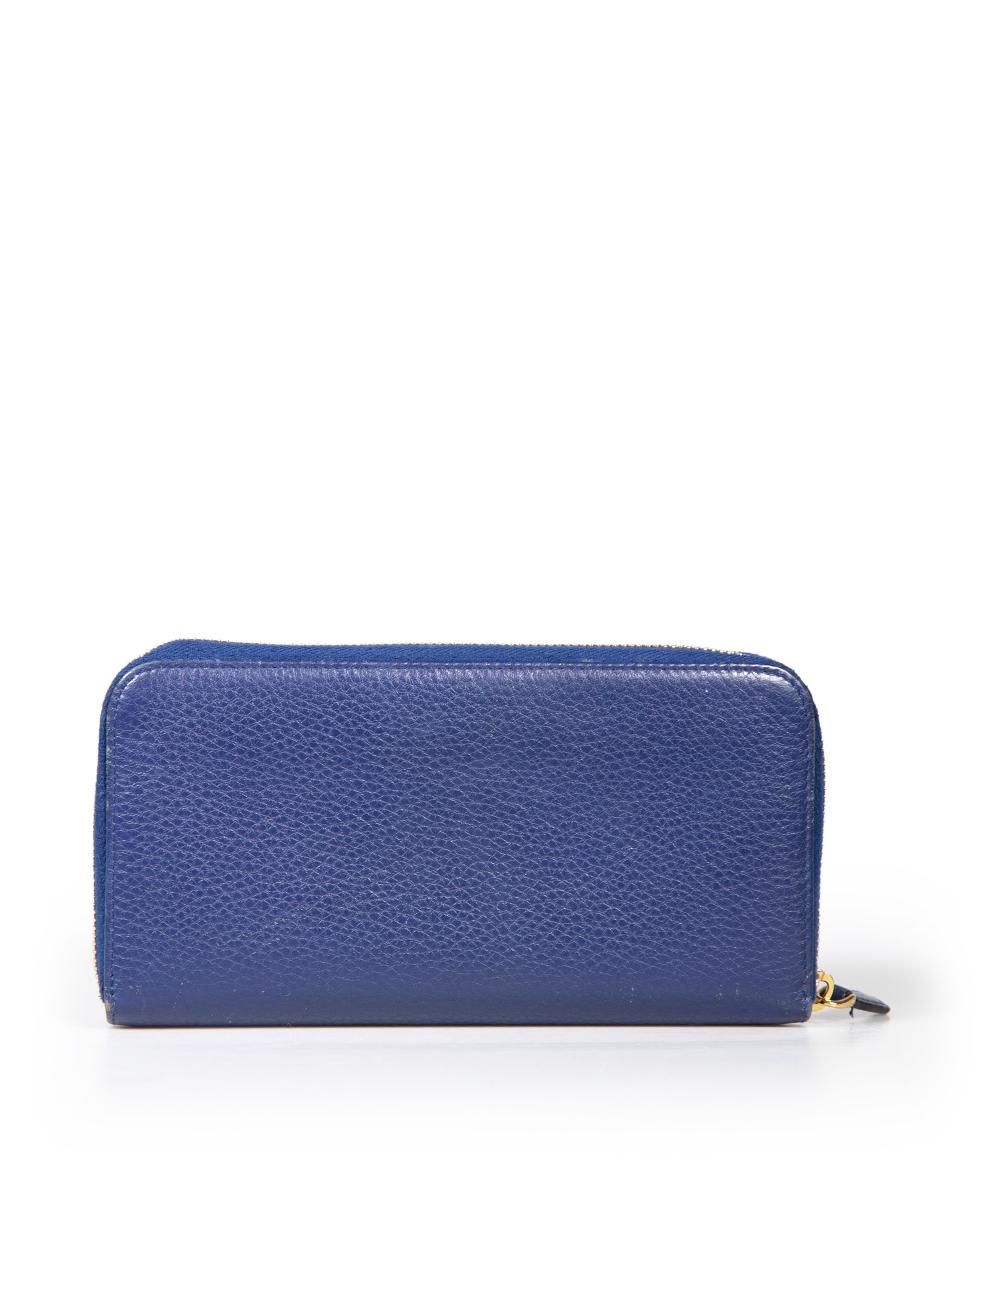 Prada Blue Leather Zip-Around Wallet In Good Condition For Sale In London, GB